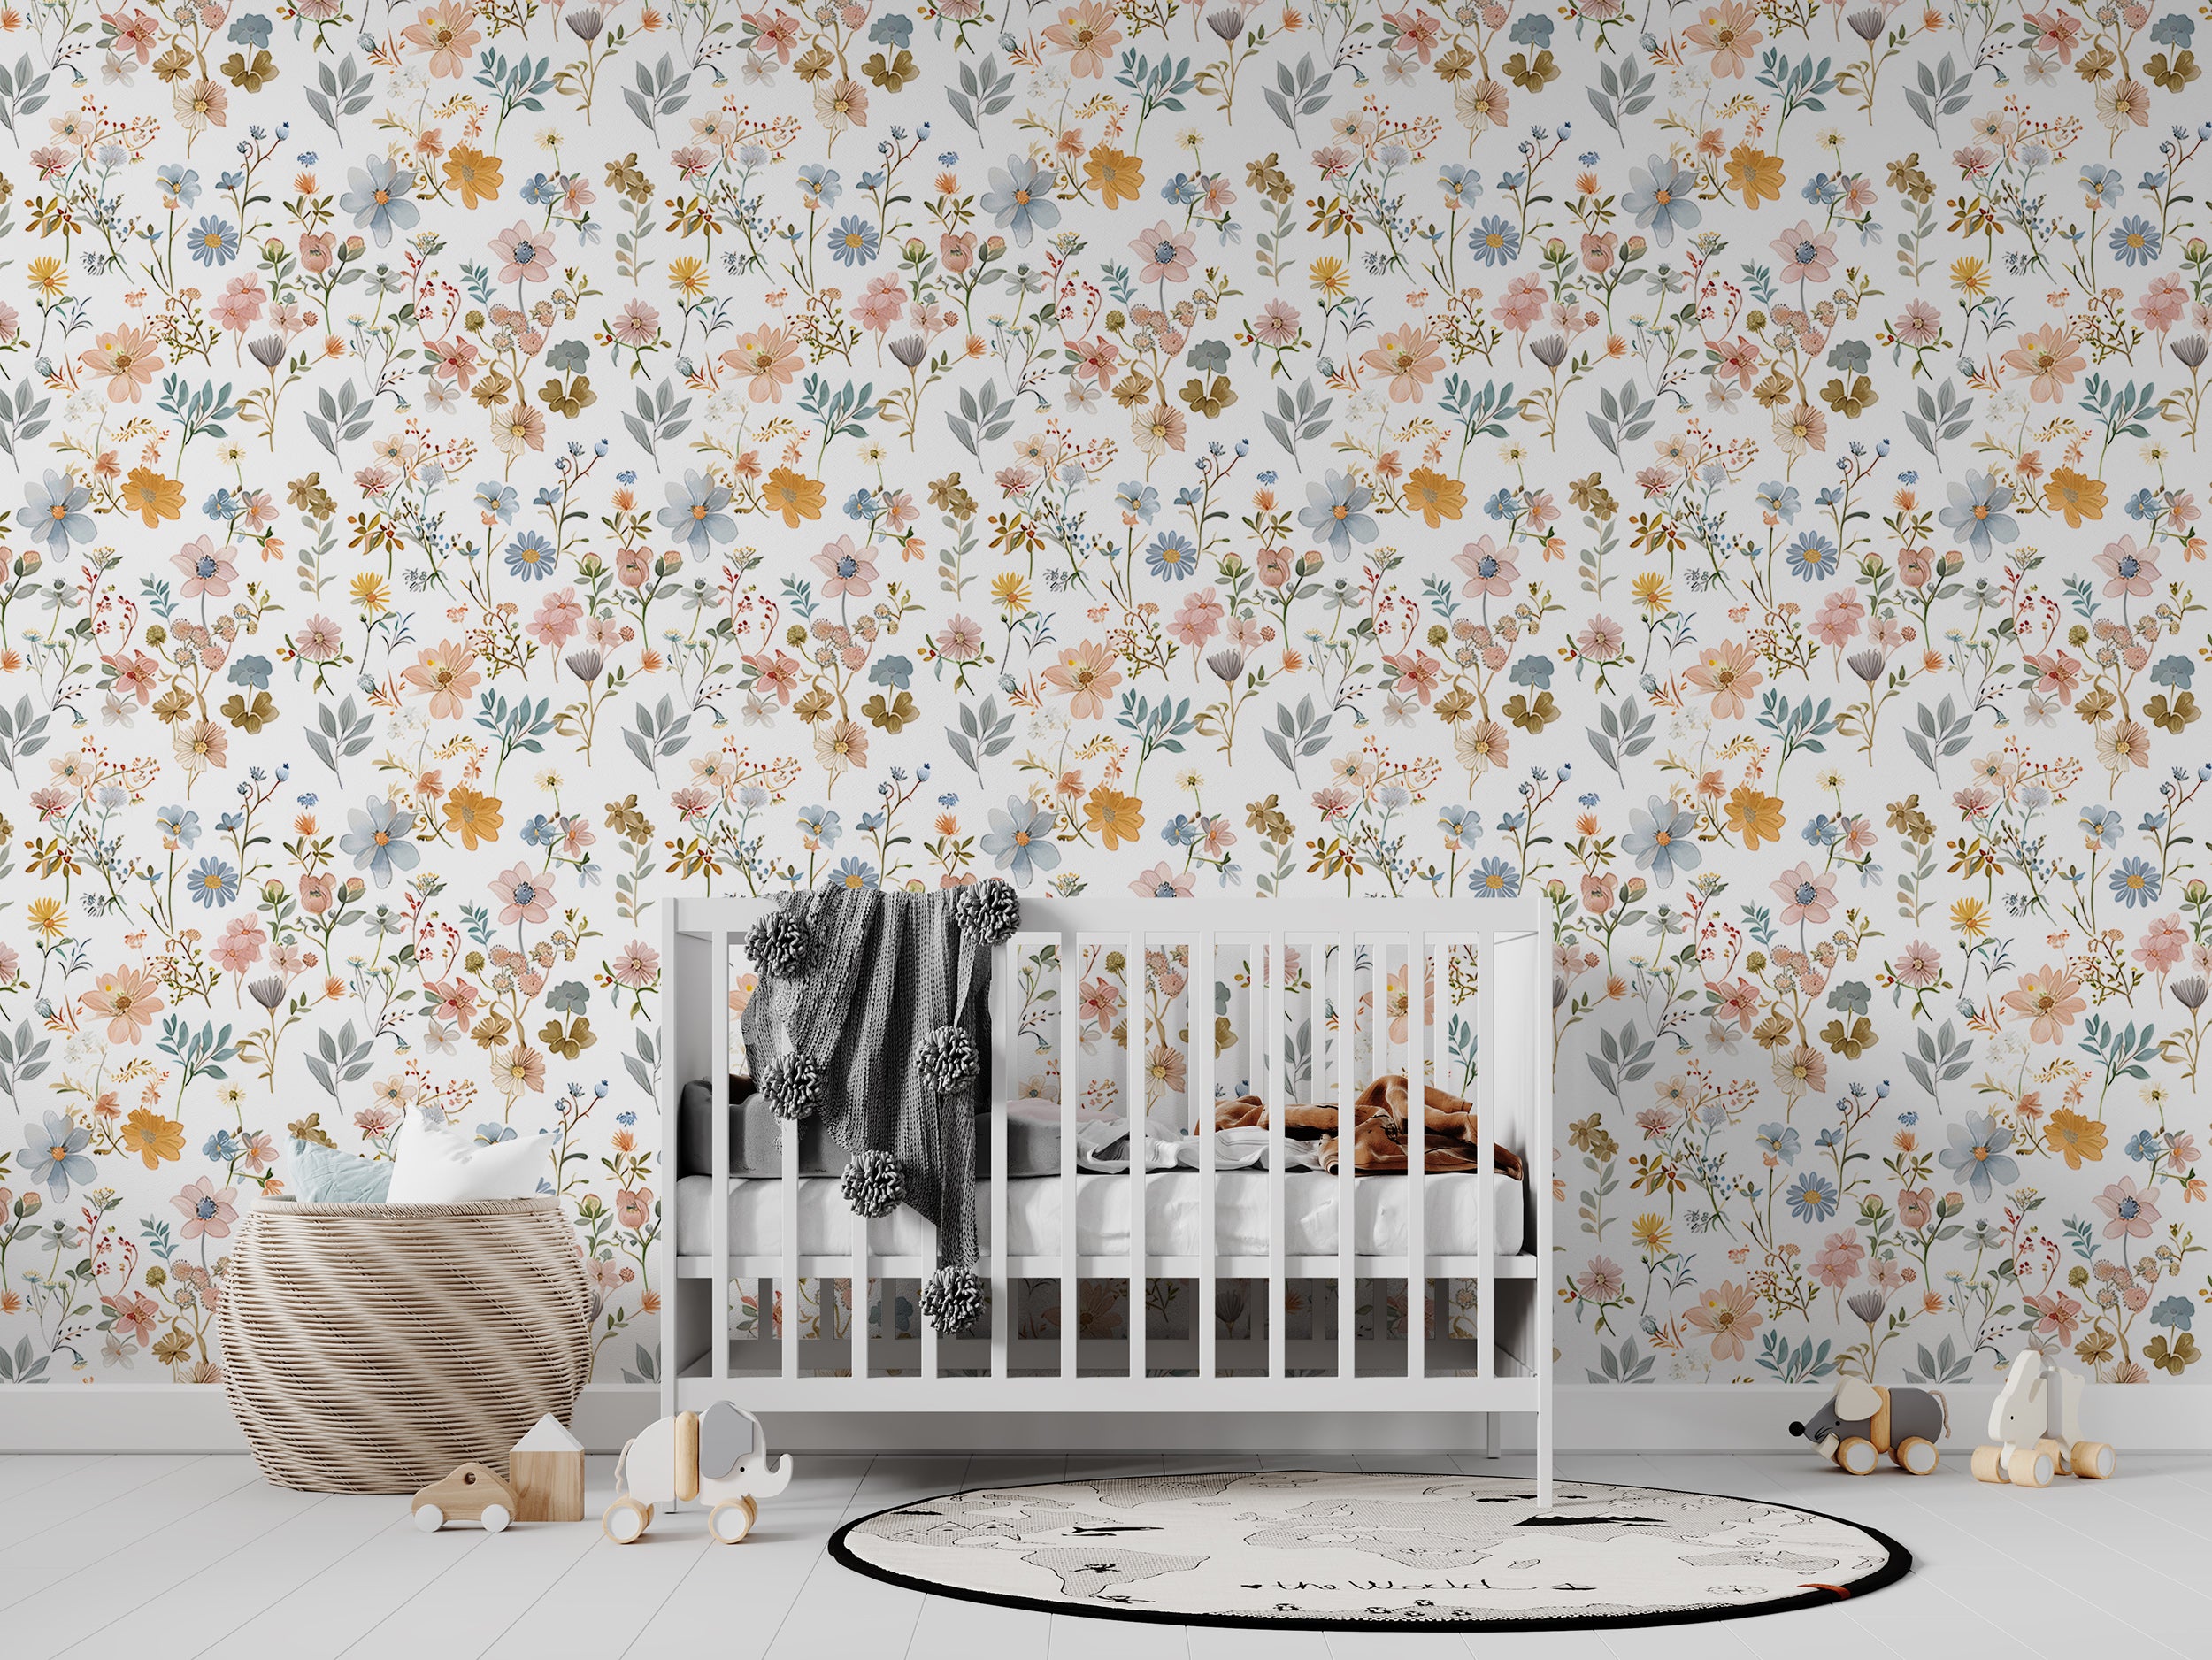 Soft Multi Color Floral Wallpaper, Pastel Meadow Flowers Wall Decal, Peel and Stick Light Botanical Wallpaper, Removable Field Wild Flower Pattern